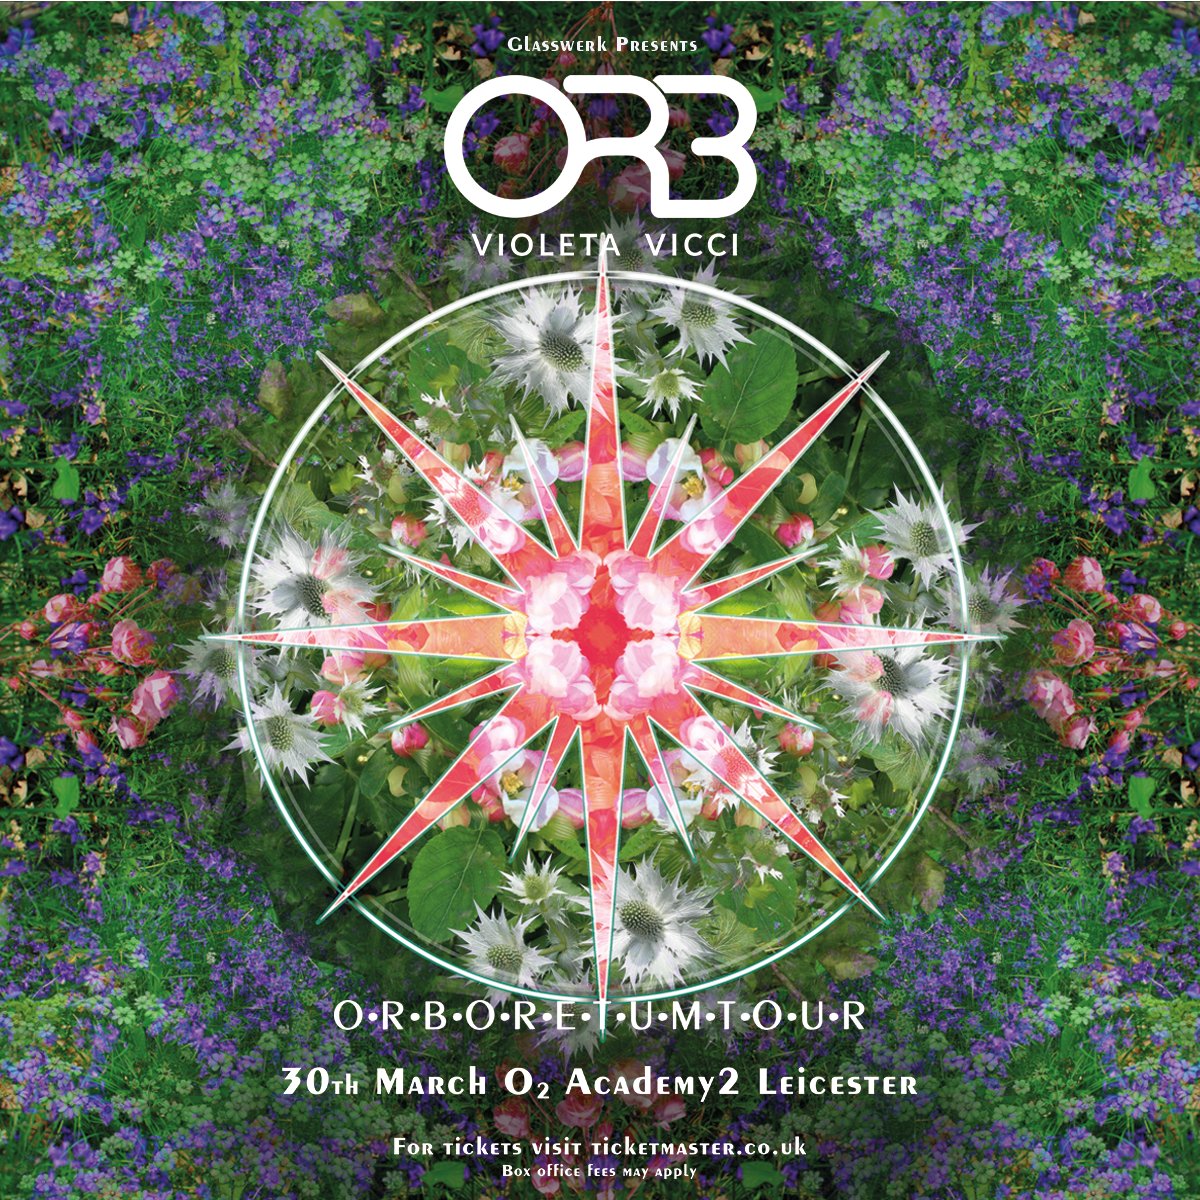 Saturday 30 March, don't miss electronic music pioneers @orbinfo - Orboretum Tour. Tickets available - amg-venues.com/MTQl50QU9cv